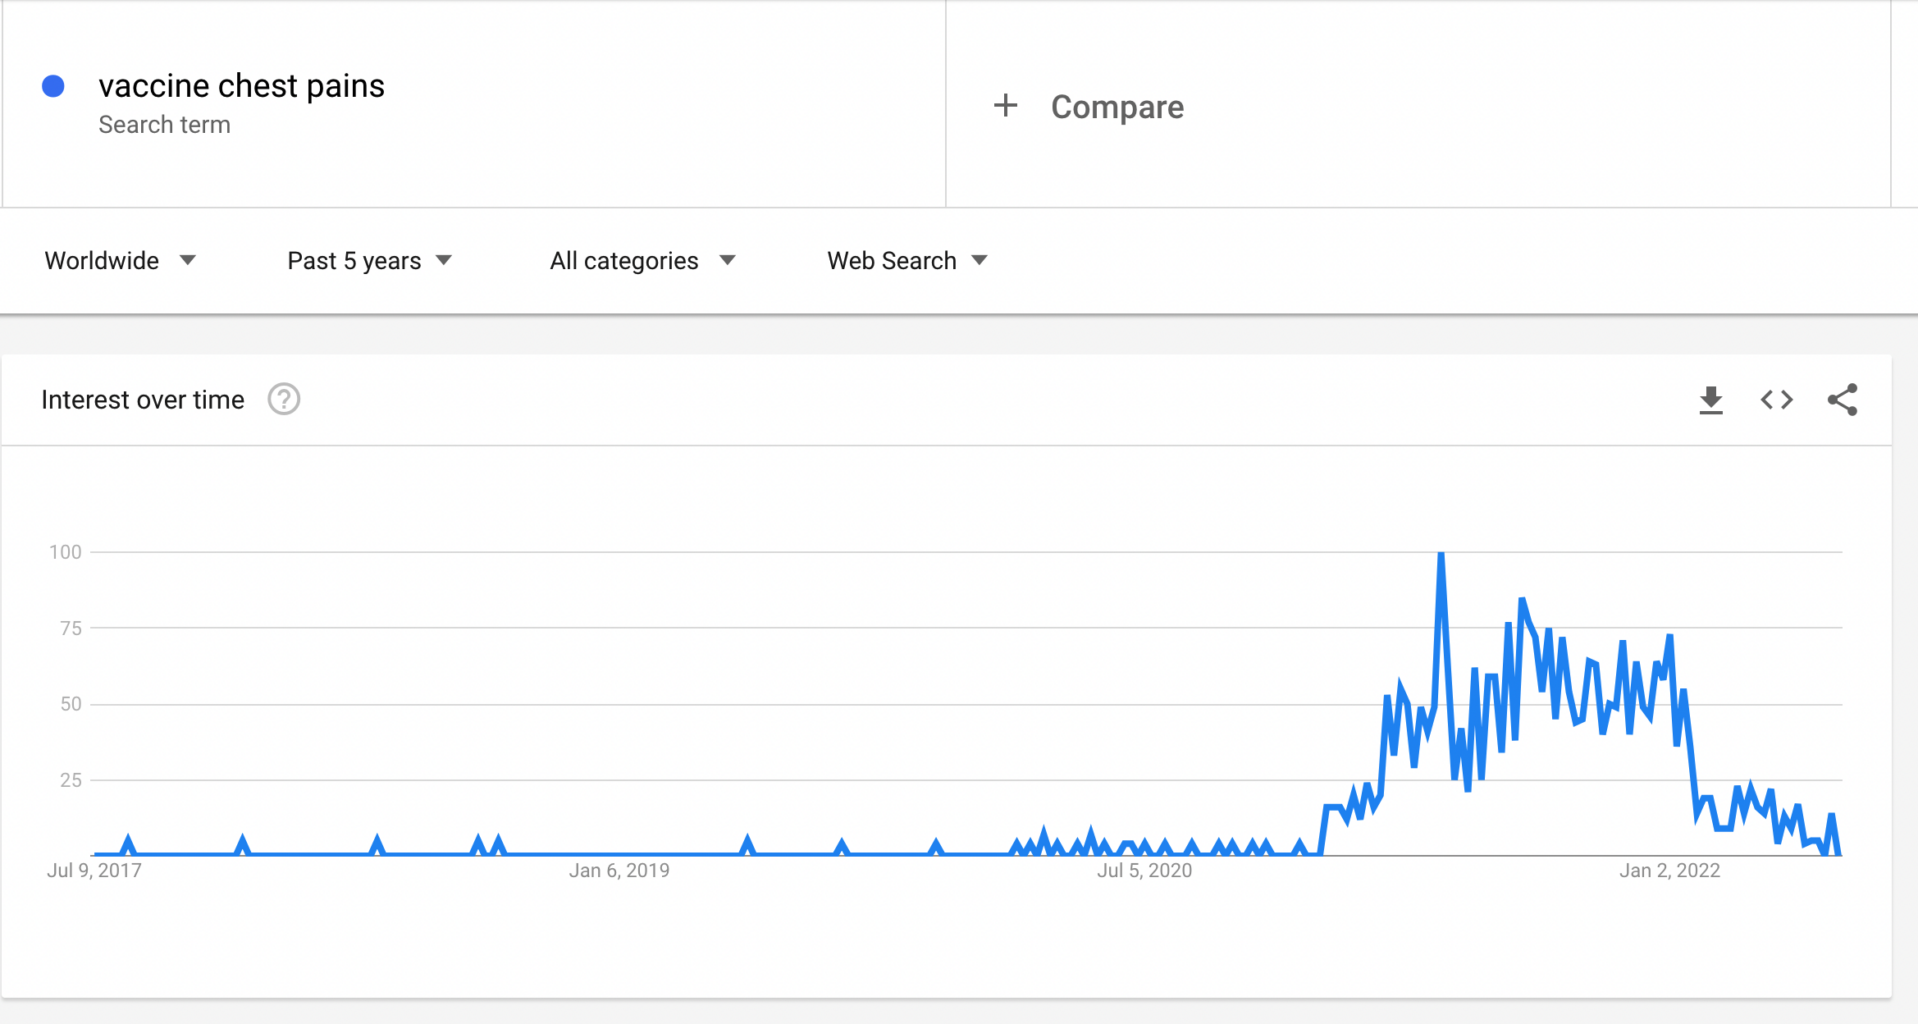 graph from Google Trends showing an huge increase in searches for the term 'vaccine chest pains' immediately after the Covid-19 vaccine roll out